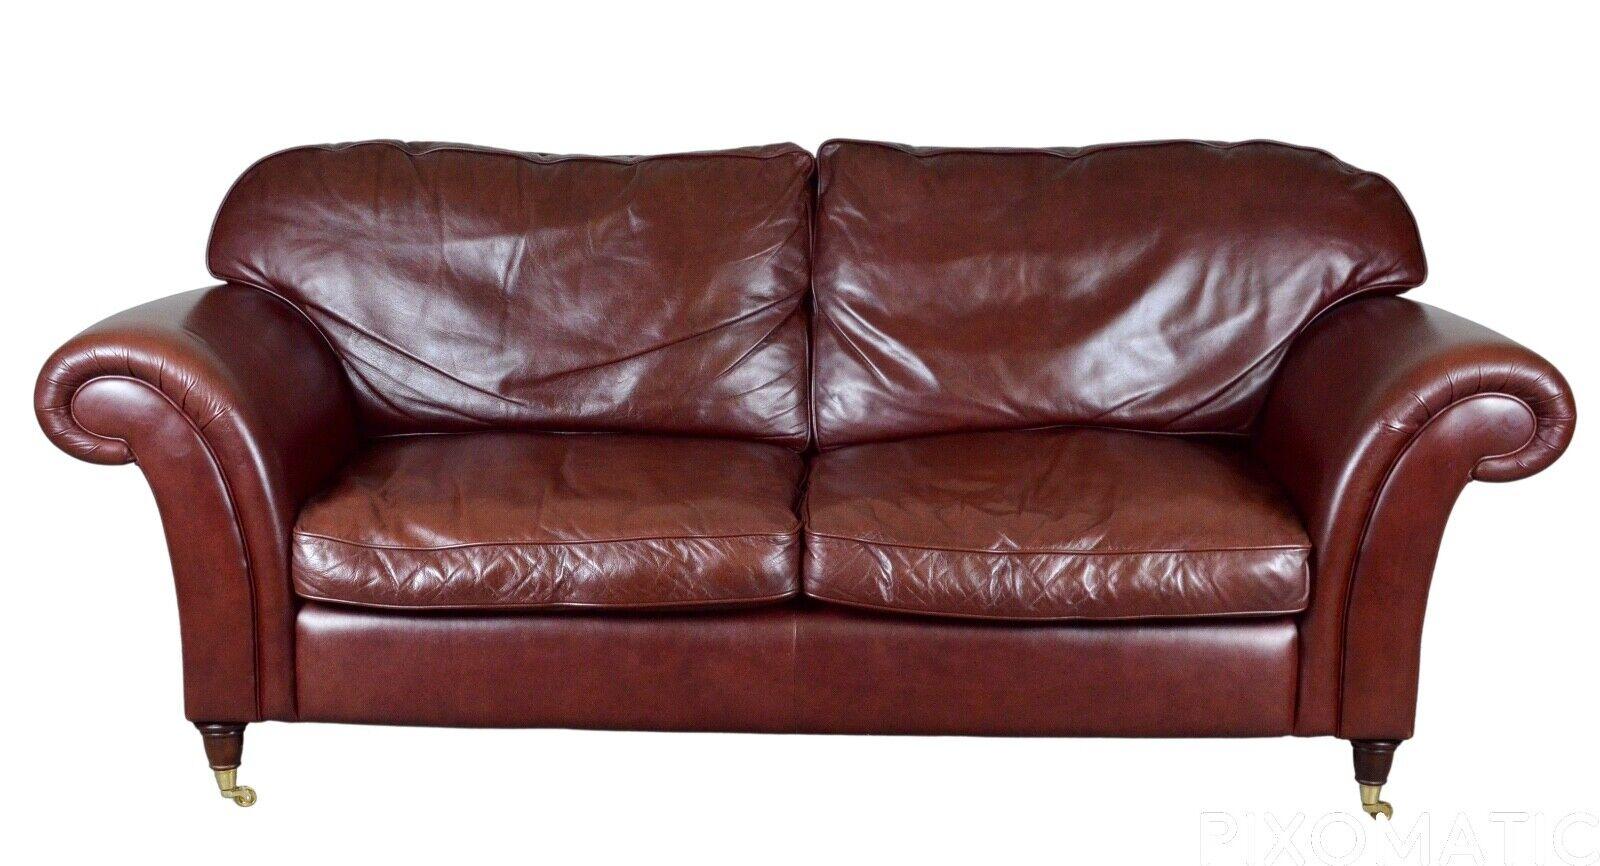 We are delighted to offer for sale this lovely Laura Ashley, Mortimer II heritage brown leather three seat sofa with castors.

The sofa is very comfortable and in good condition. We also have the matching 2 seater sofa and storage stool available